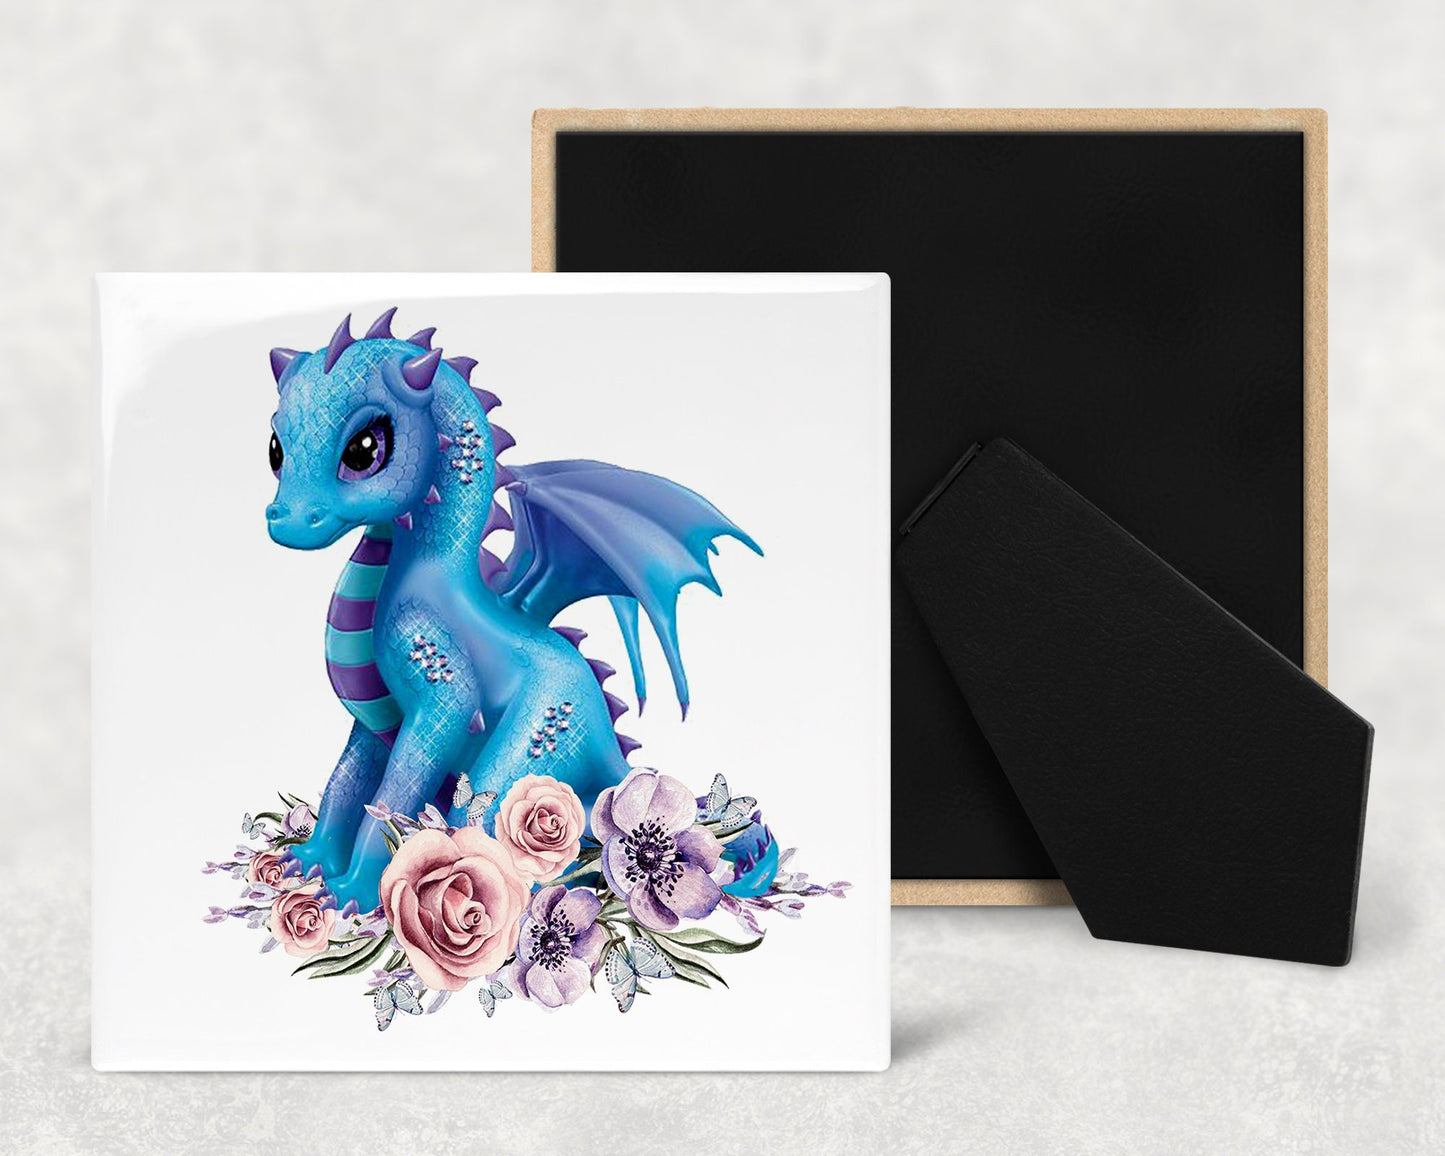 Cute Baby Dragon Art Decorative Ceramic Tile with Optional Easel Back - Available in 3 Sizes